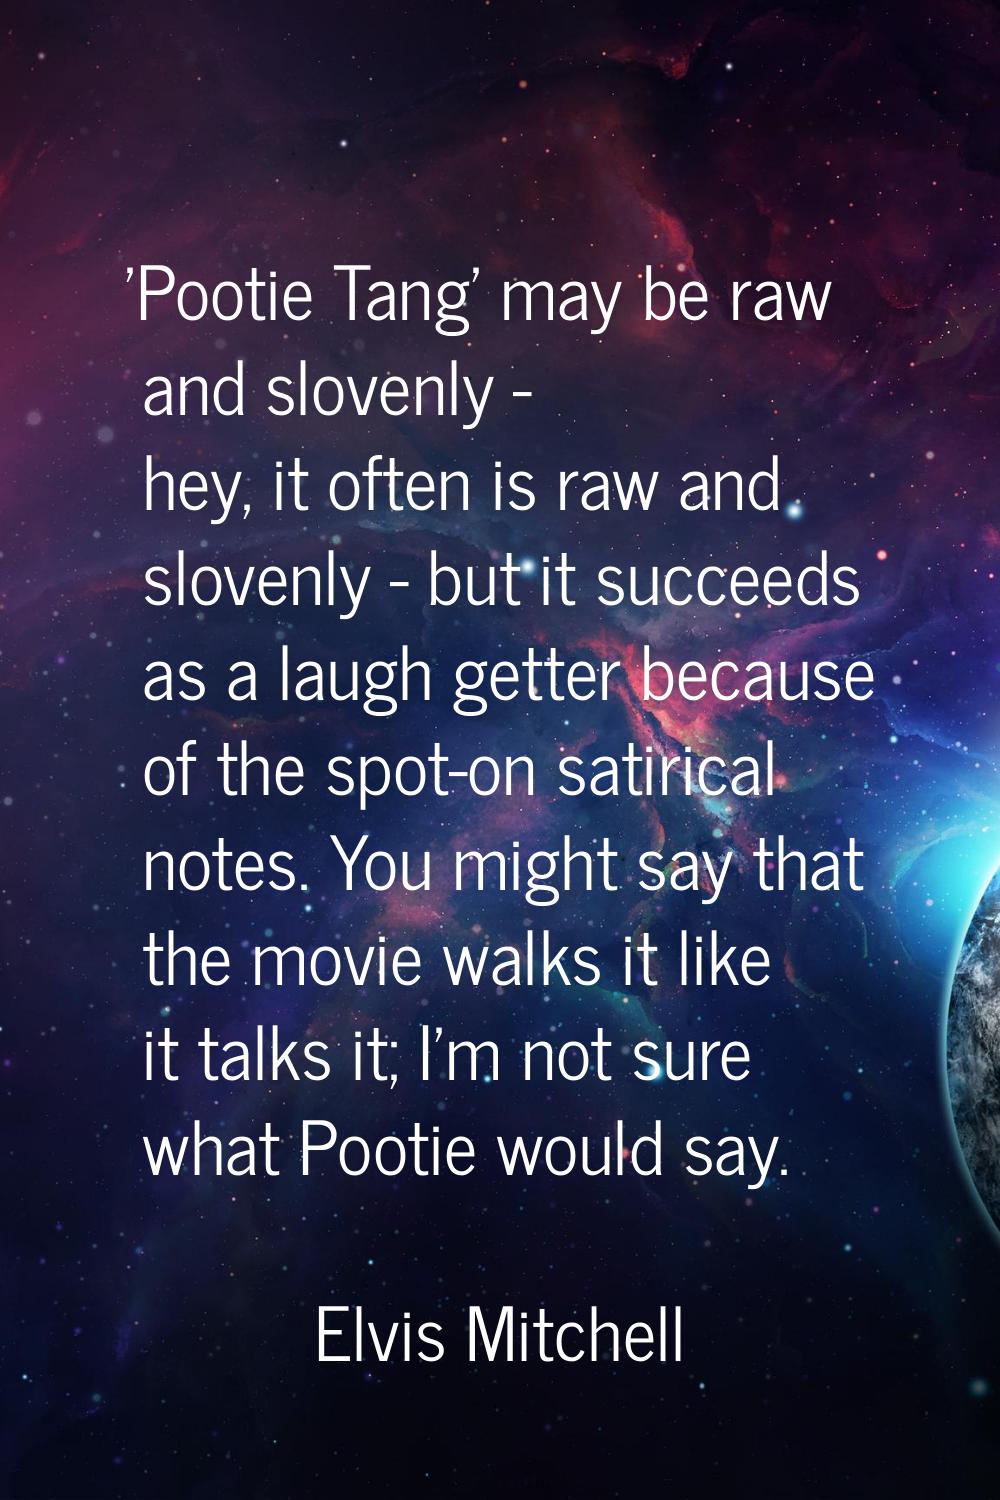 'Pootie Tang' may be raw and slovenly - hey, it often is raw and slovenly - but it succeeds as a la